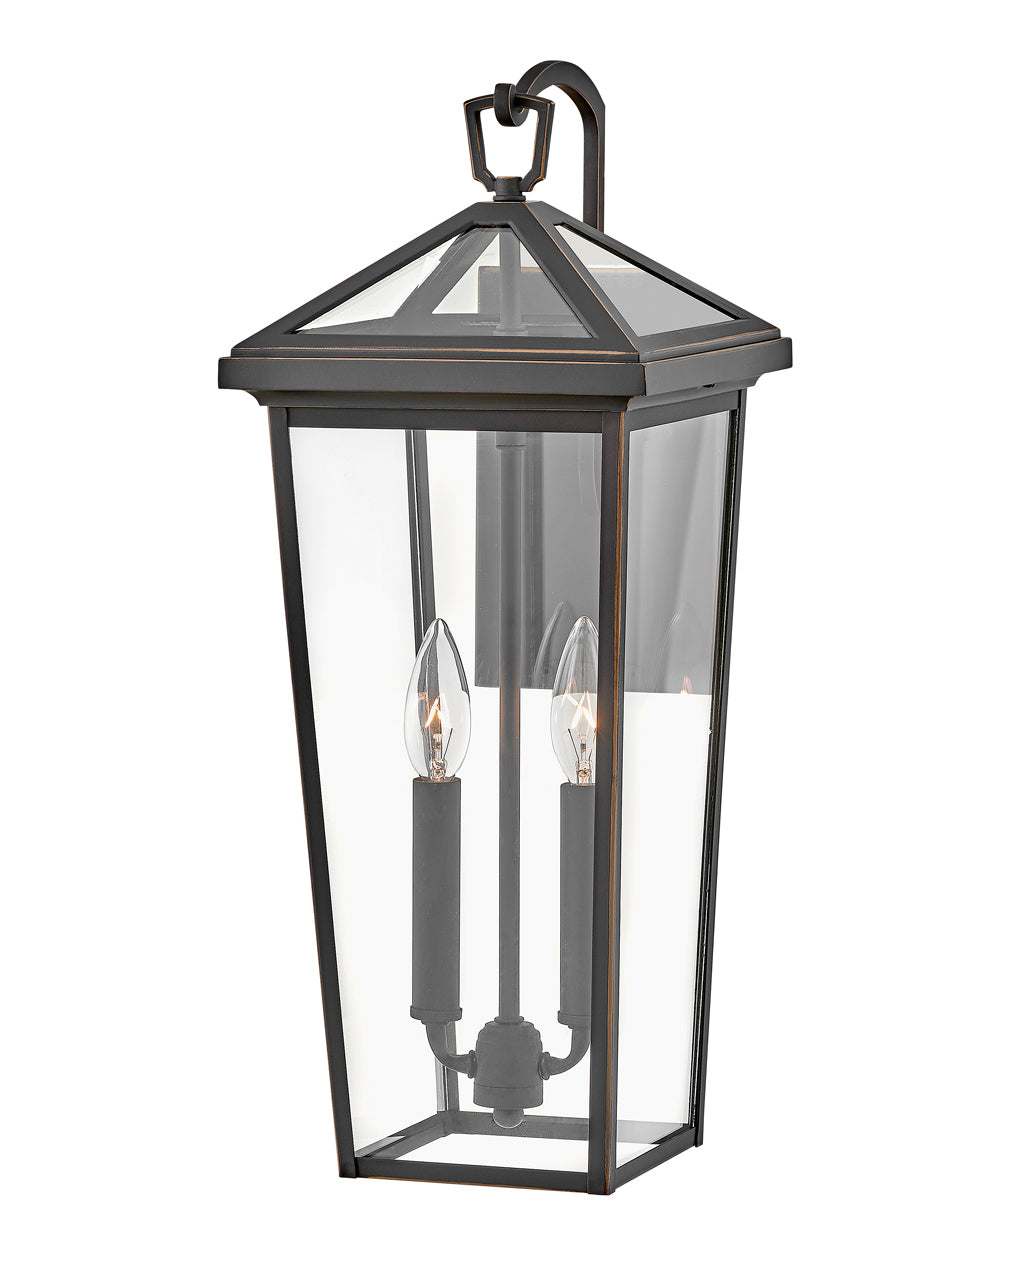 OUTDOOR ALFORD PLACE Wall Mount Lantern Outdoor l Wall Hinkley Oil Rubbed Bronze 9.0x8.0x20.0 